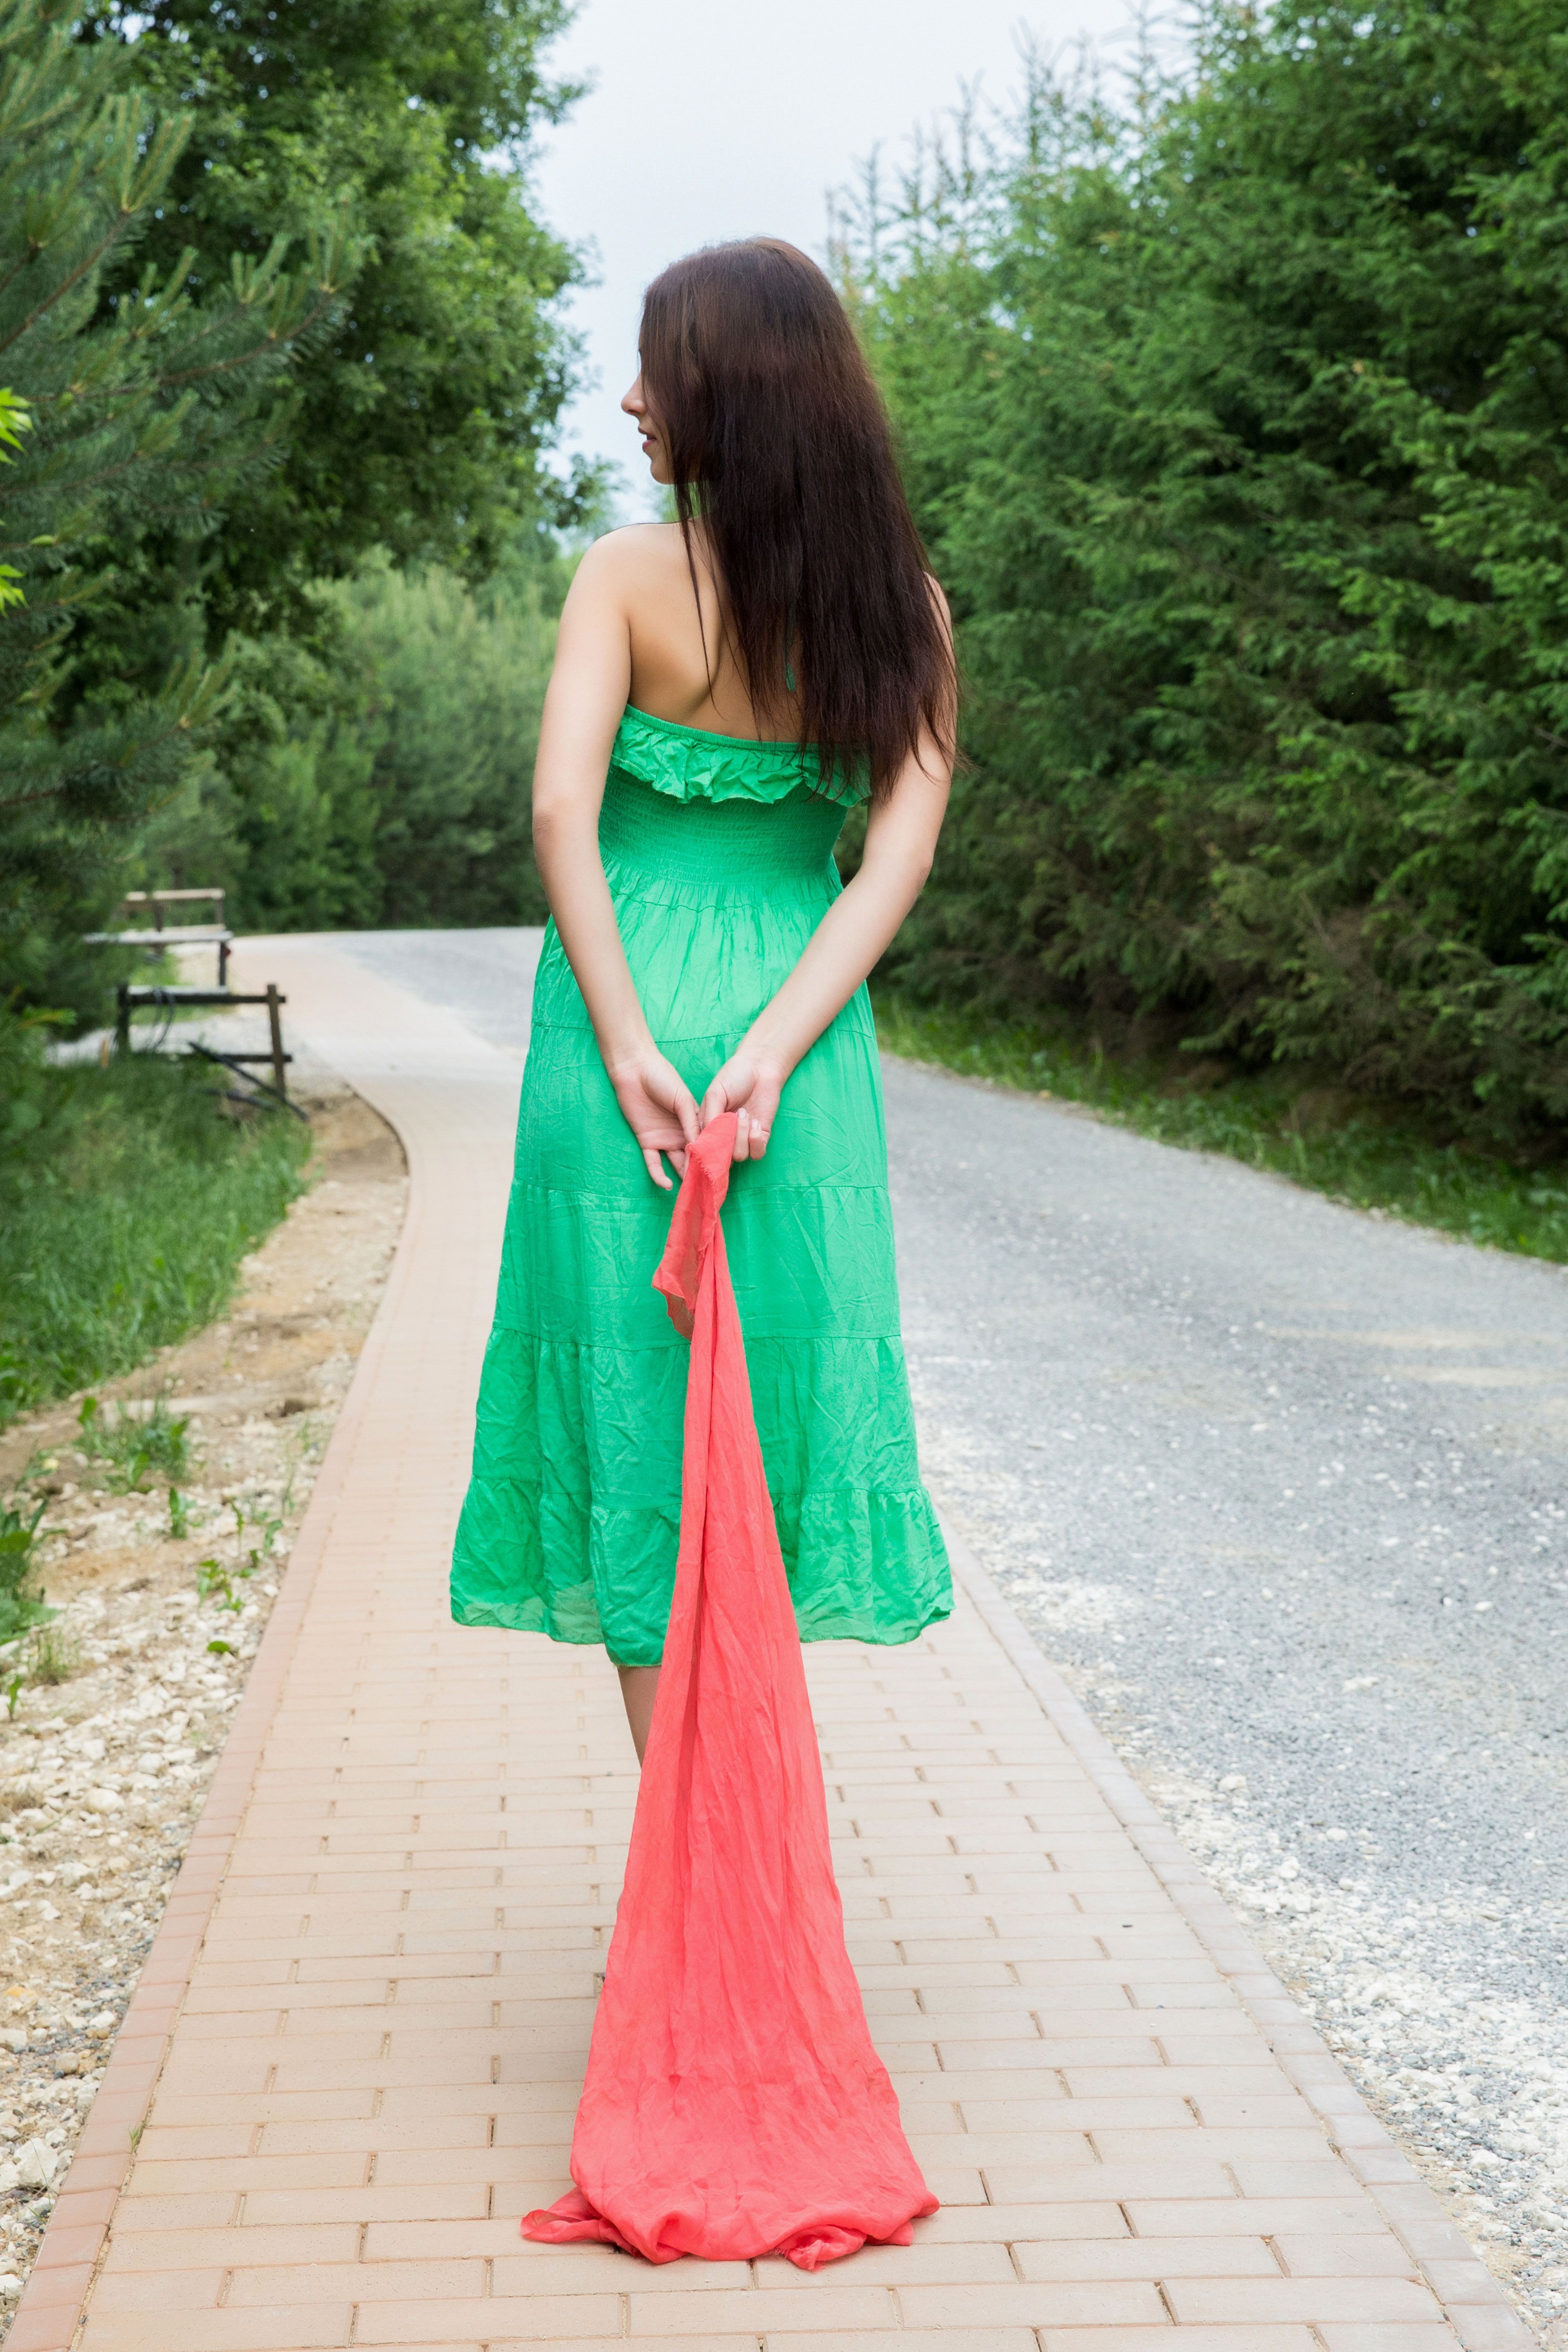 Gorgeous Shaved Brunette Evita Lima With Nice Feet Wearing Green Dress Tgp Gallery 315840